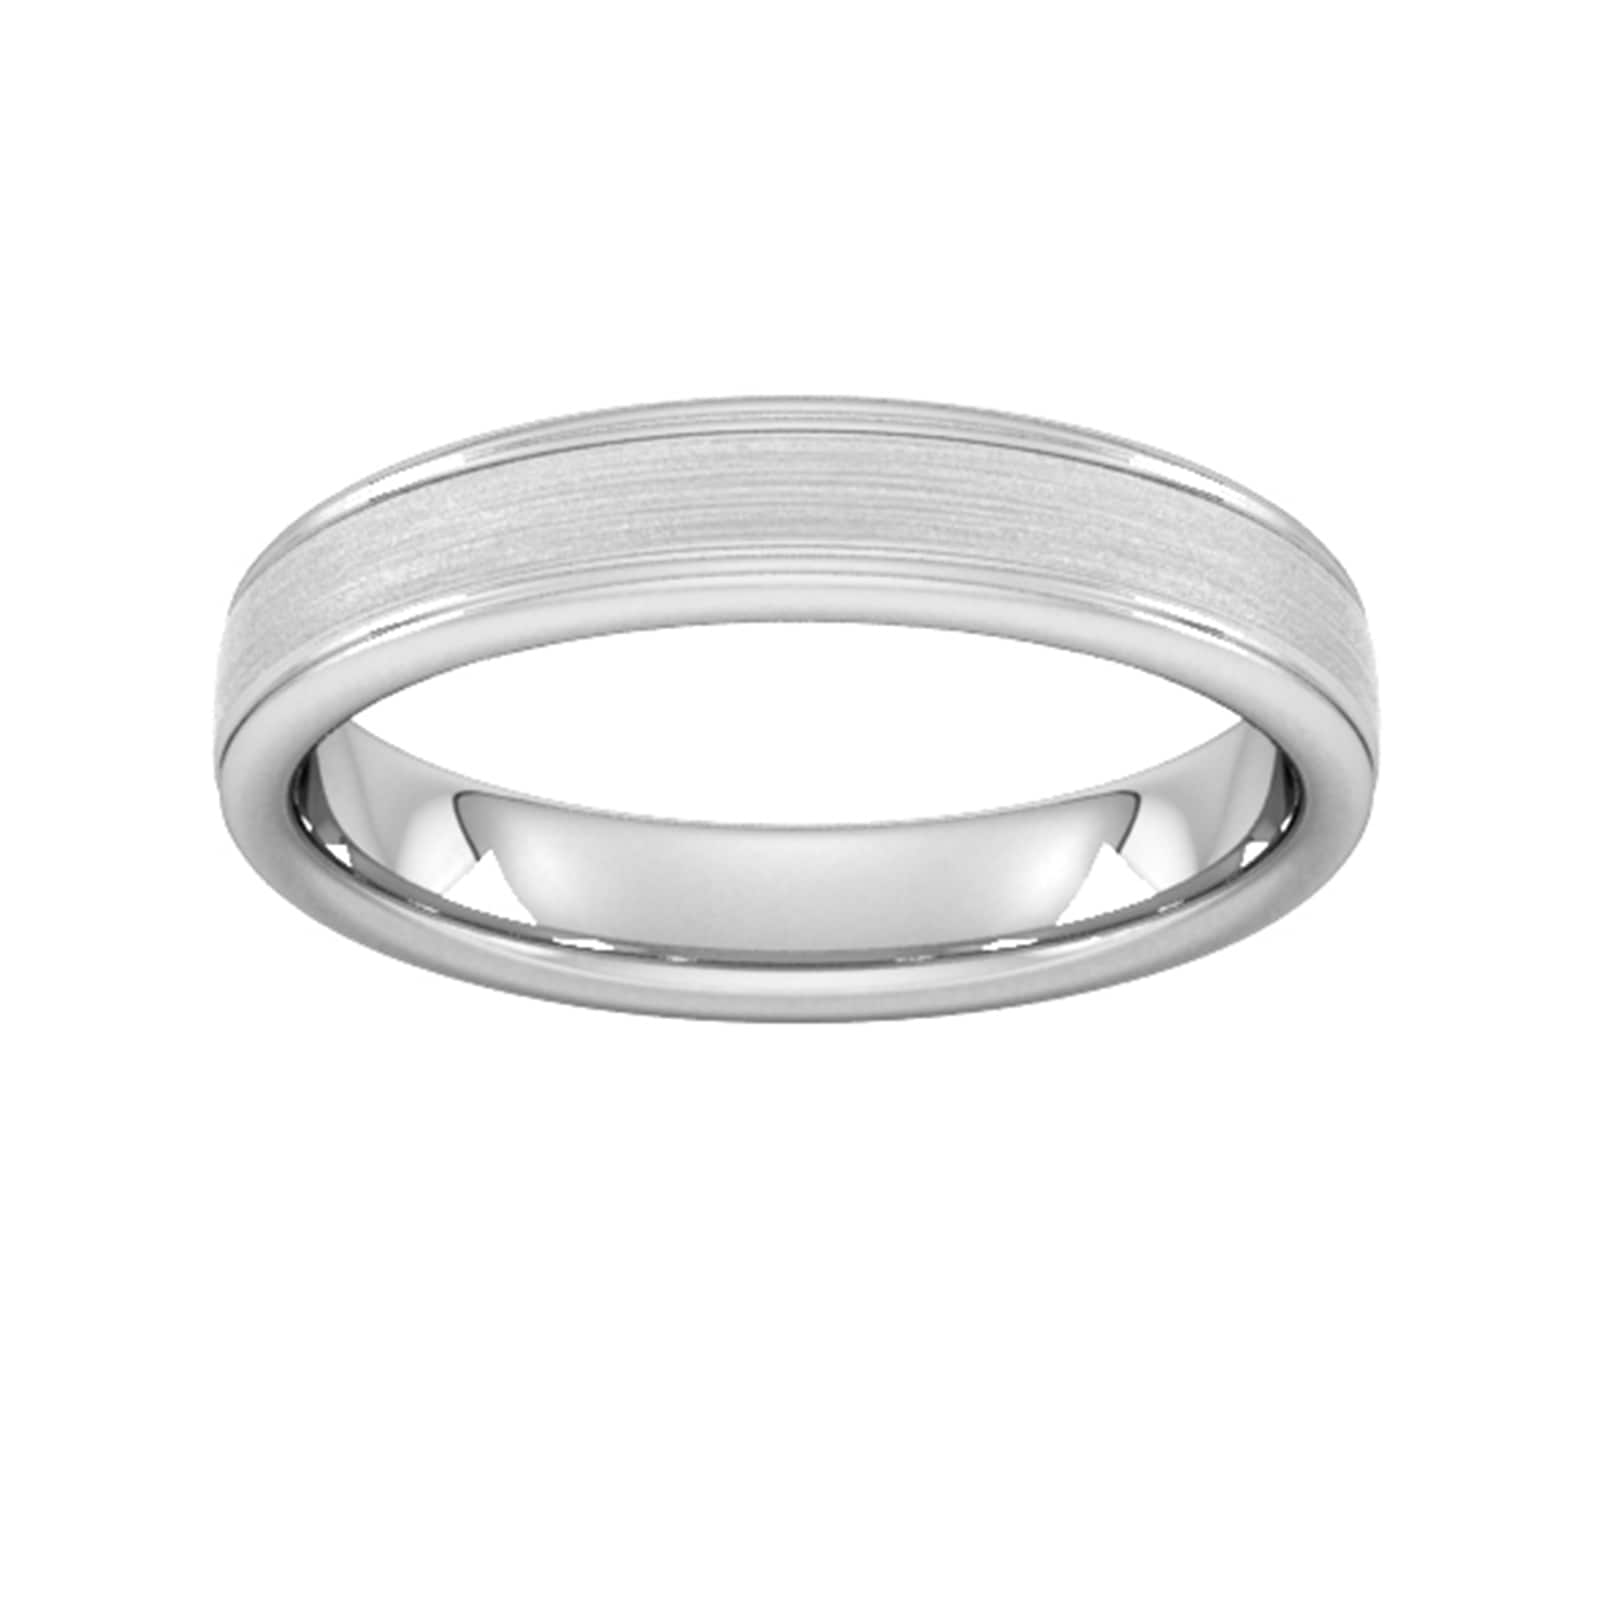 4mm D Shape Standard Matt Centre With Grooves Wedding Ring In 9 Carat White Gold - Ring Size I